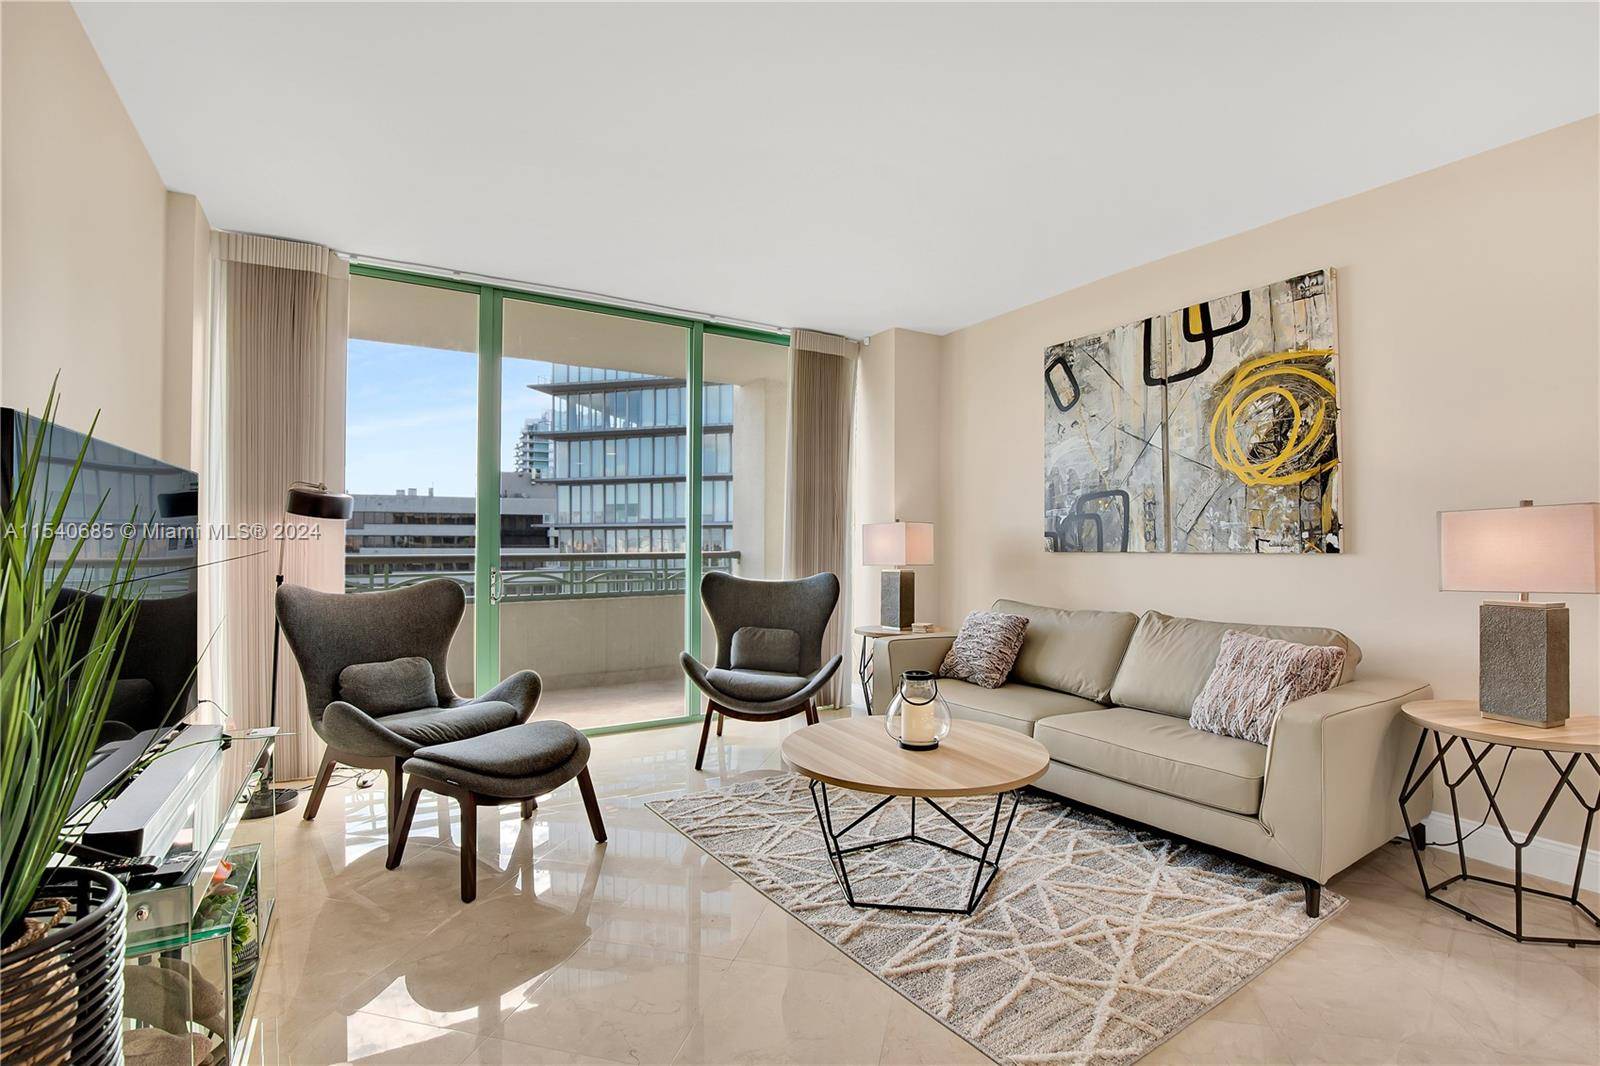 Enjoy the Ritz Carlton lifestyle and all that Coconut Grove has to offer.